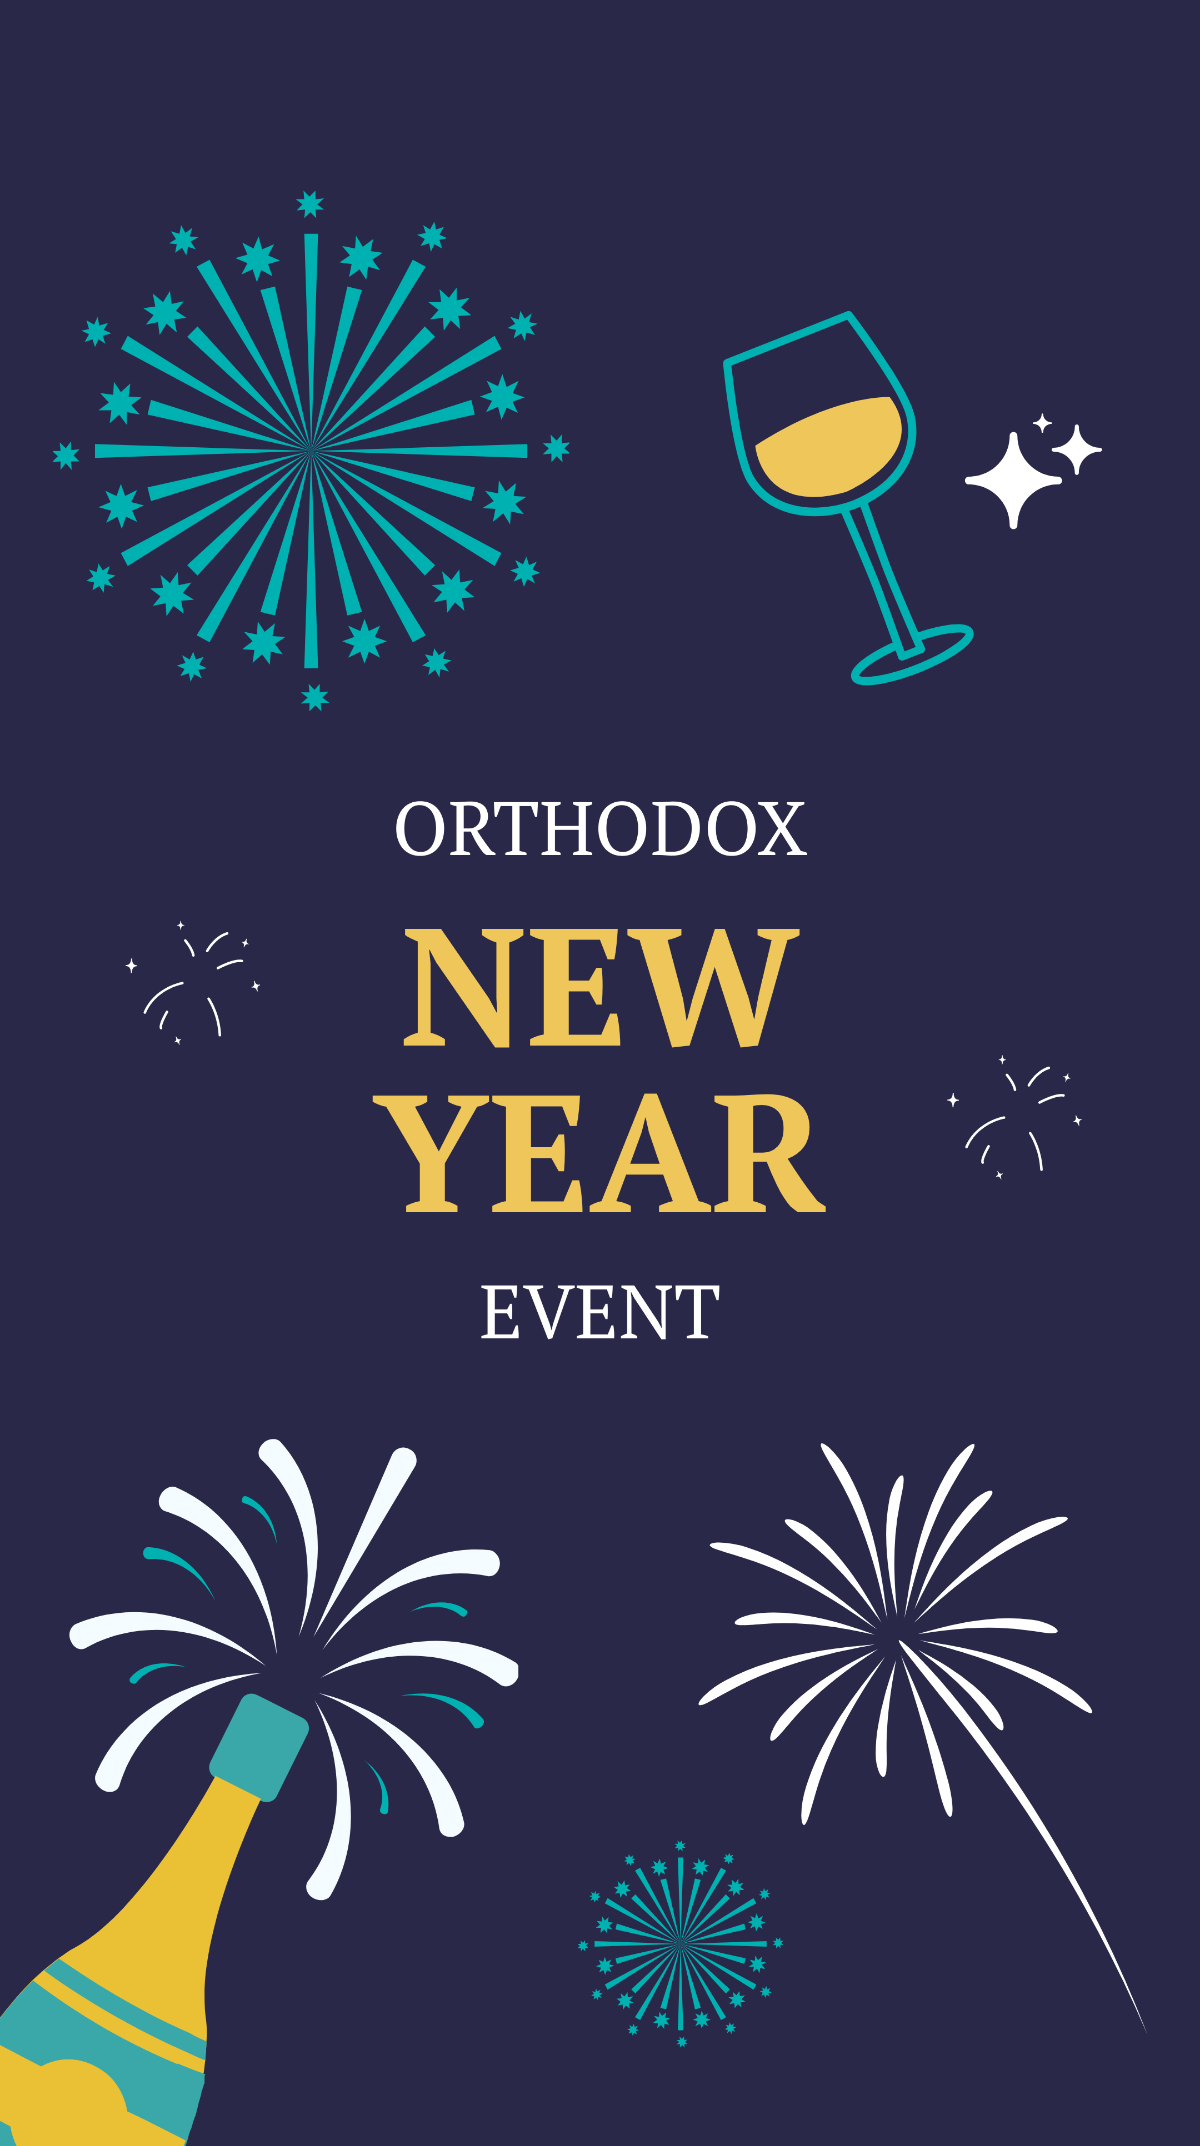 Orthodox New Year Event Instagram Story Template